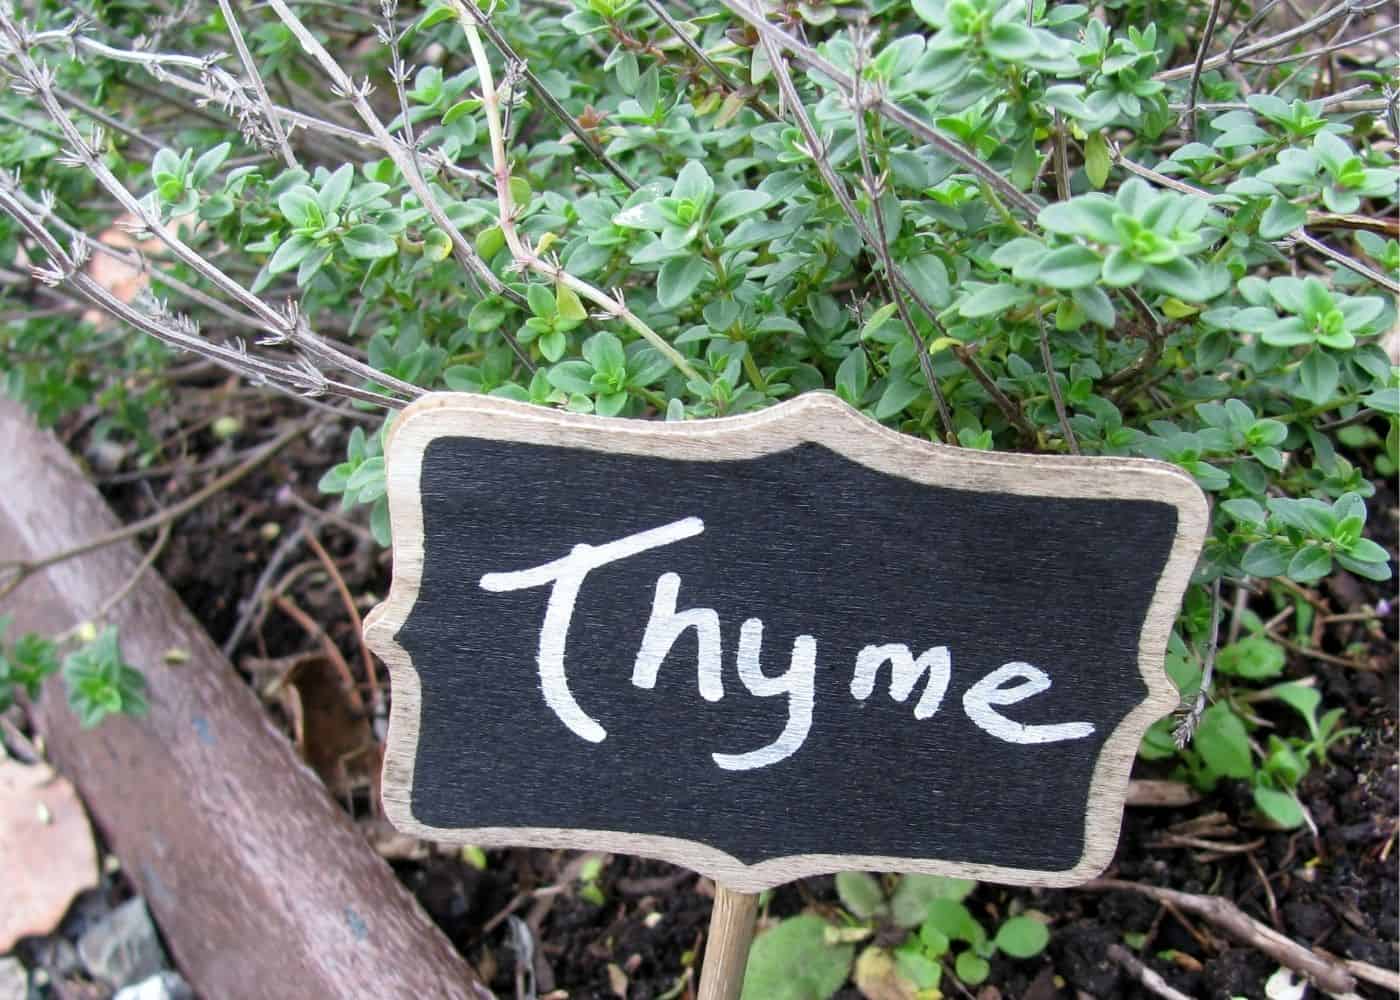 Thyme - companion plants for tomatoes